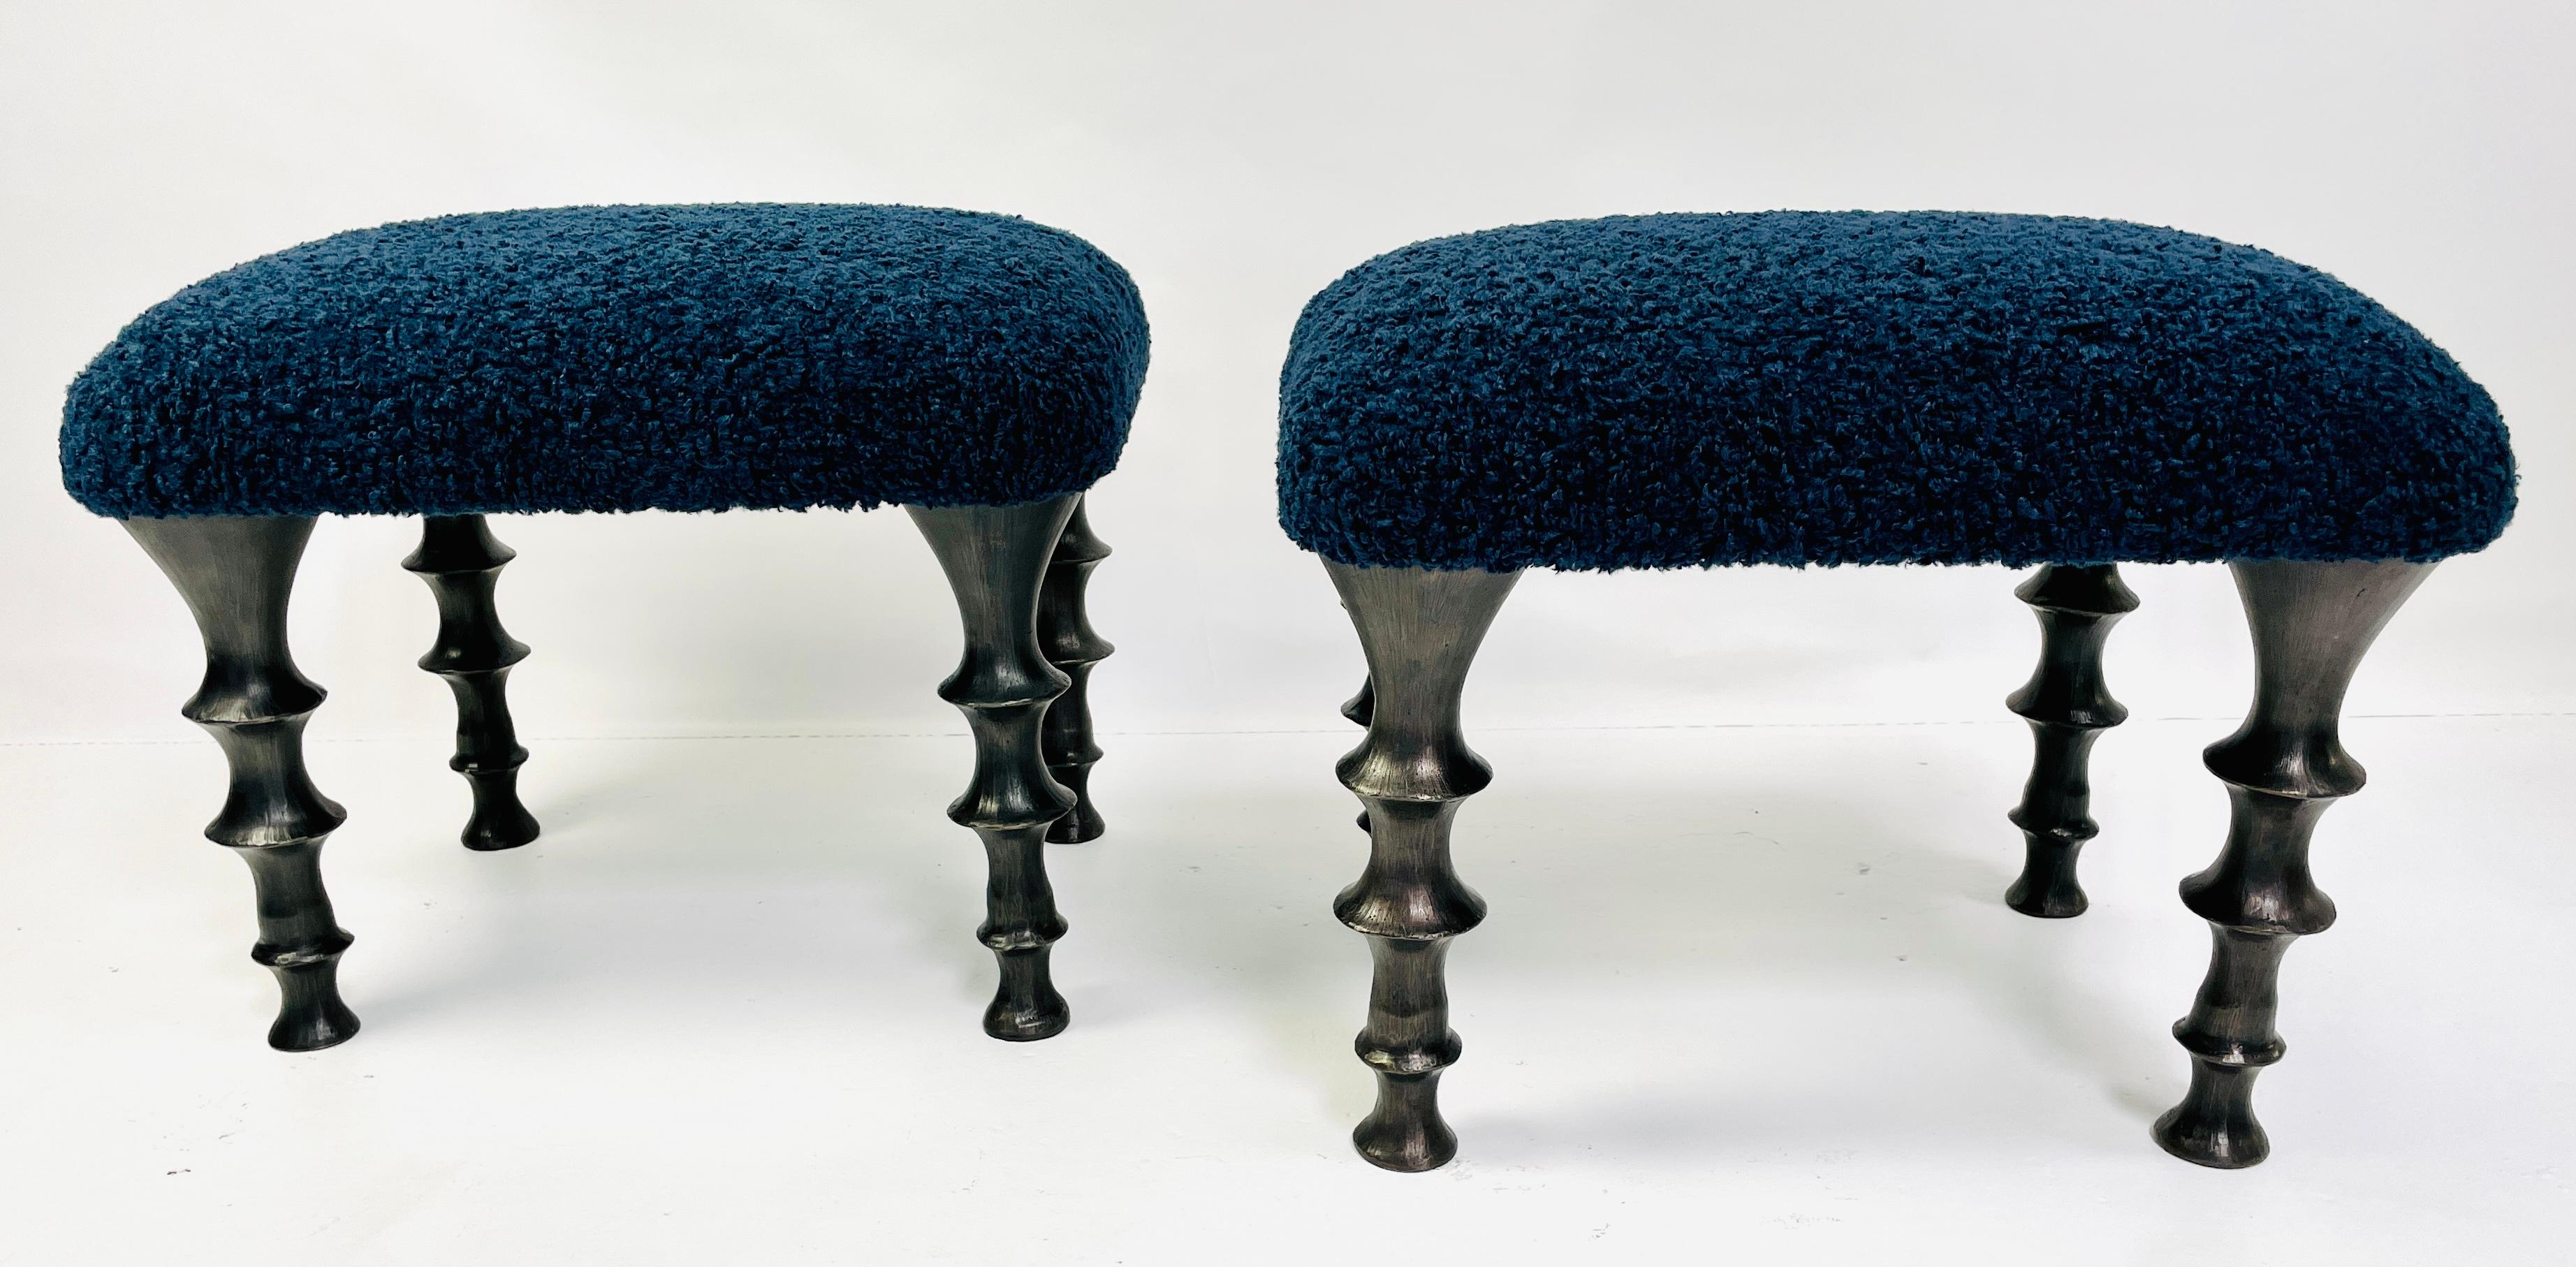 Two stools with cast bronze legs and midnight blue bouclé cushions. The design of the legs have an organic texture. These stools will make a powerful statement in your interior.